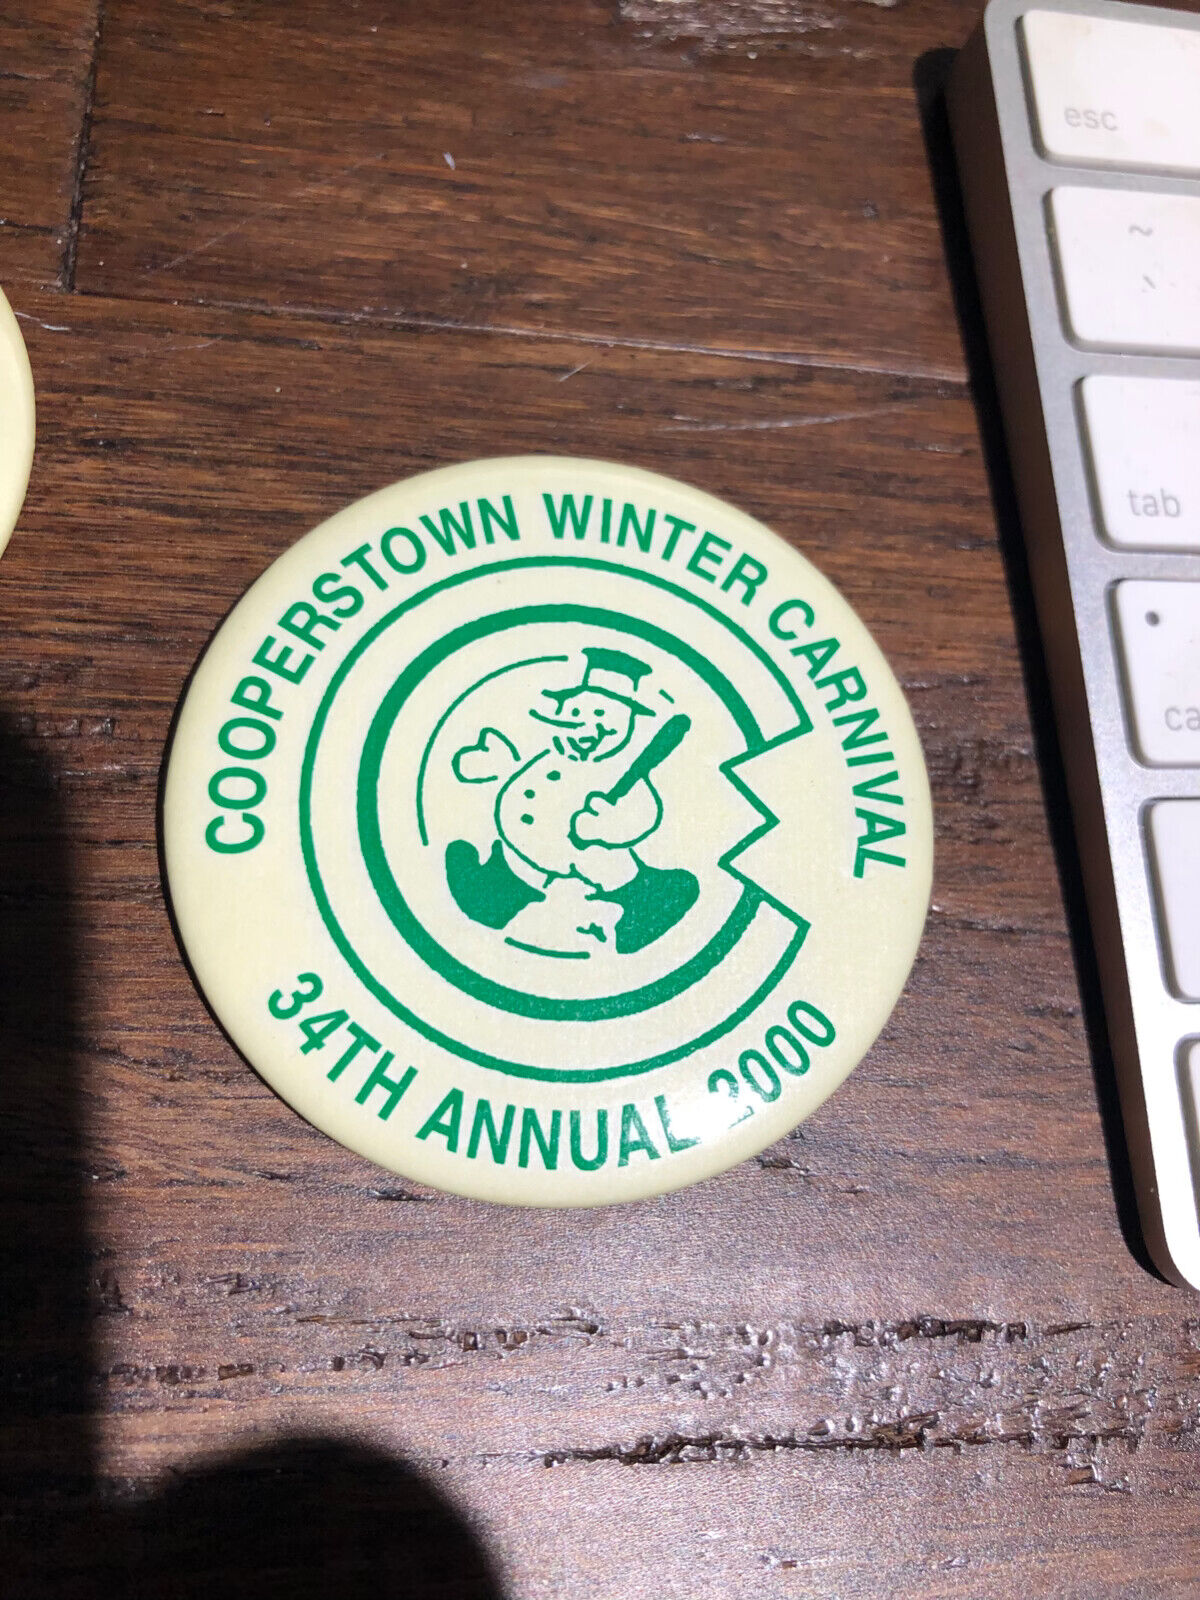 cooperstown winter carnival pin button wanted to buy